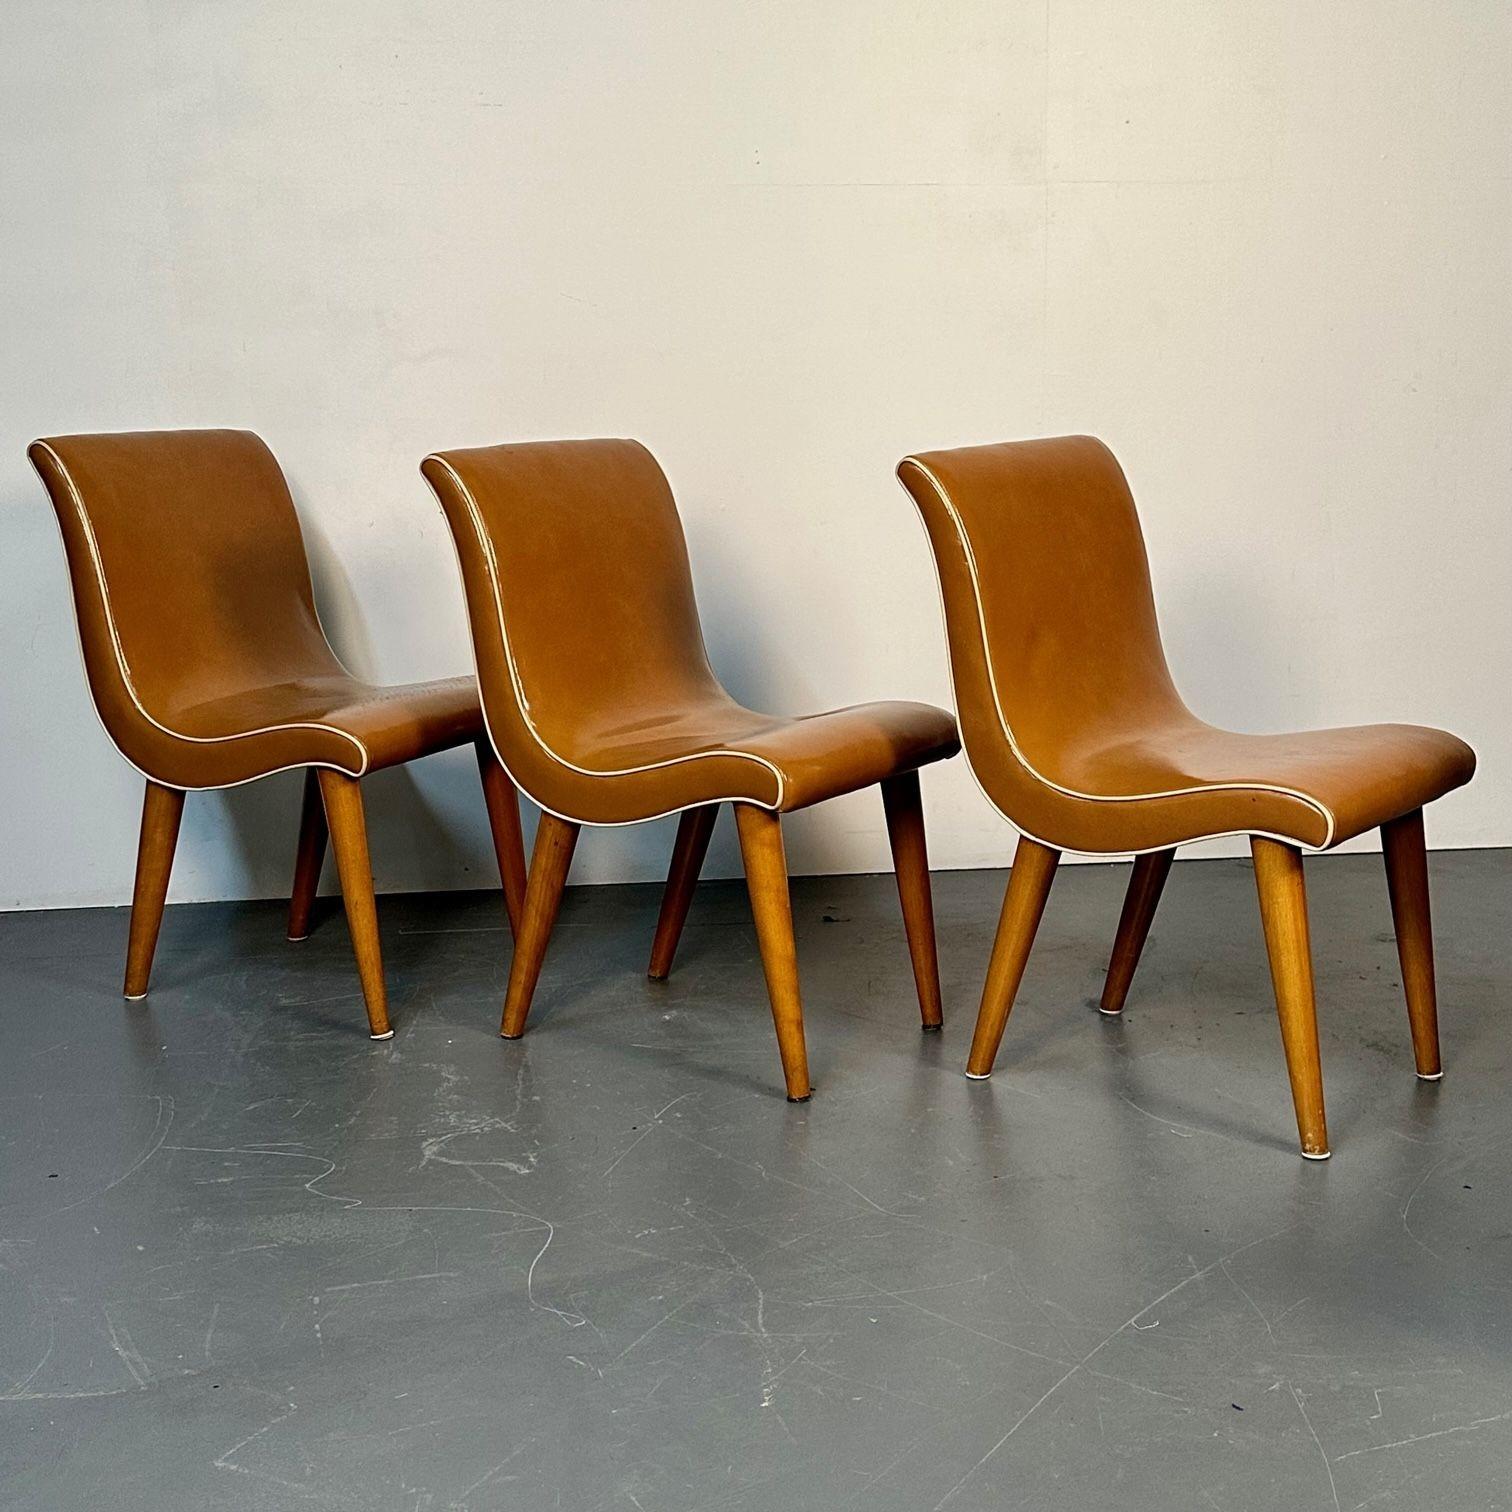 Four American Mid-Century Modern Curvy Dining / Side Chairs by Russel Wright For Sale 2